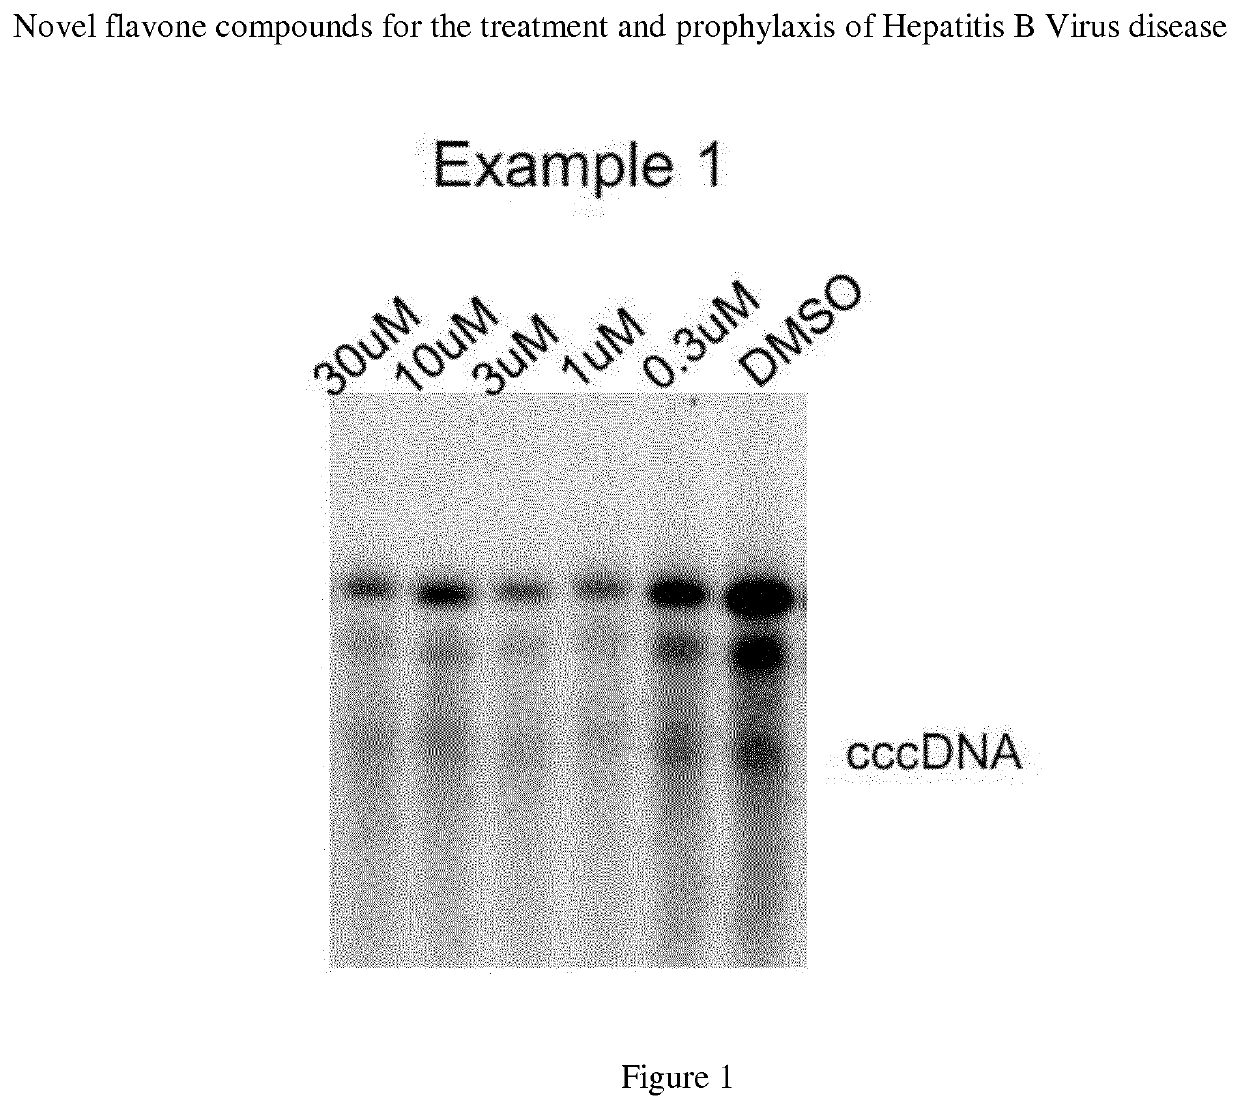 Flavone compounds for the treatment and prophylaxis of hepatitis b virus disease